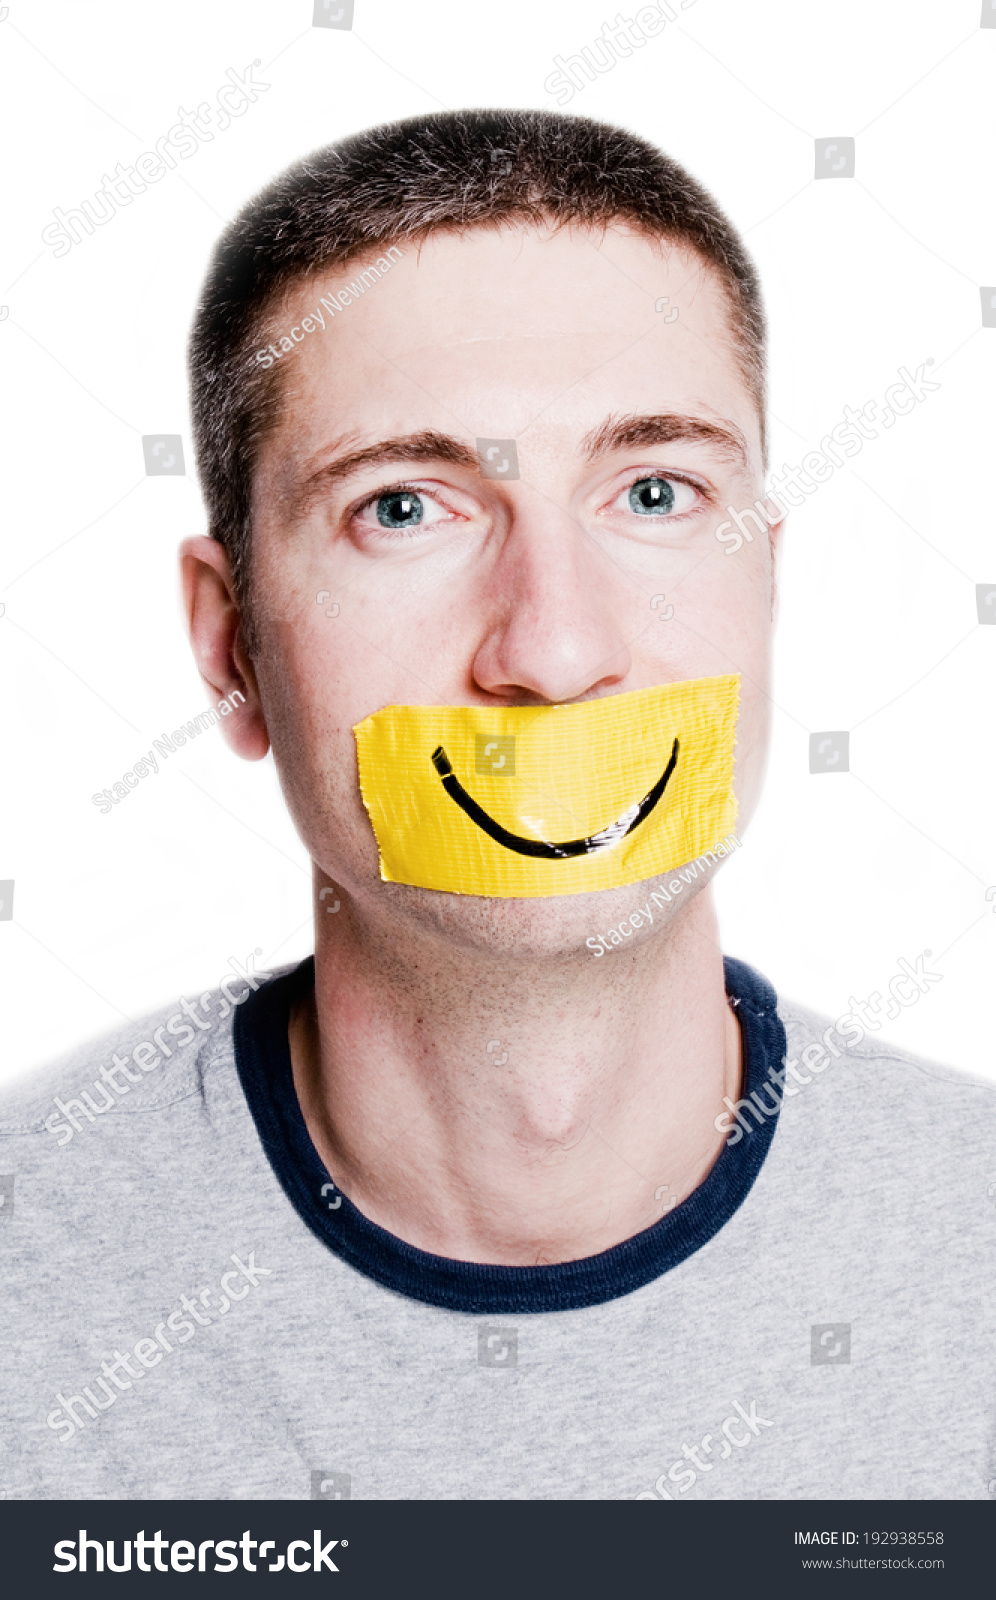 stock-photo-adult-man-with-duct-tape-smile-on-face-192938558.jpg